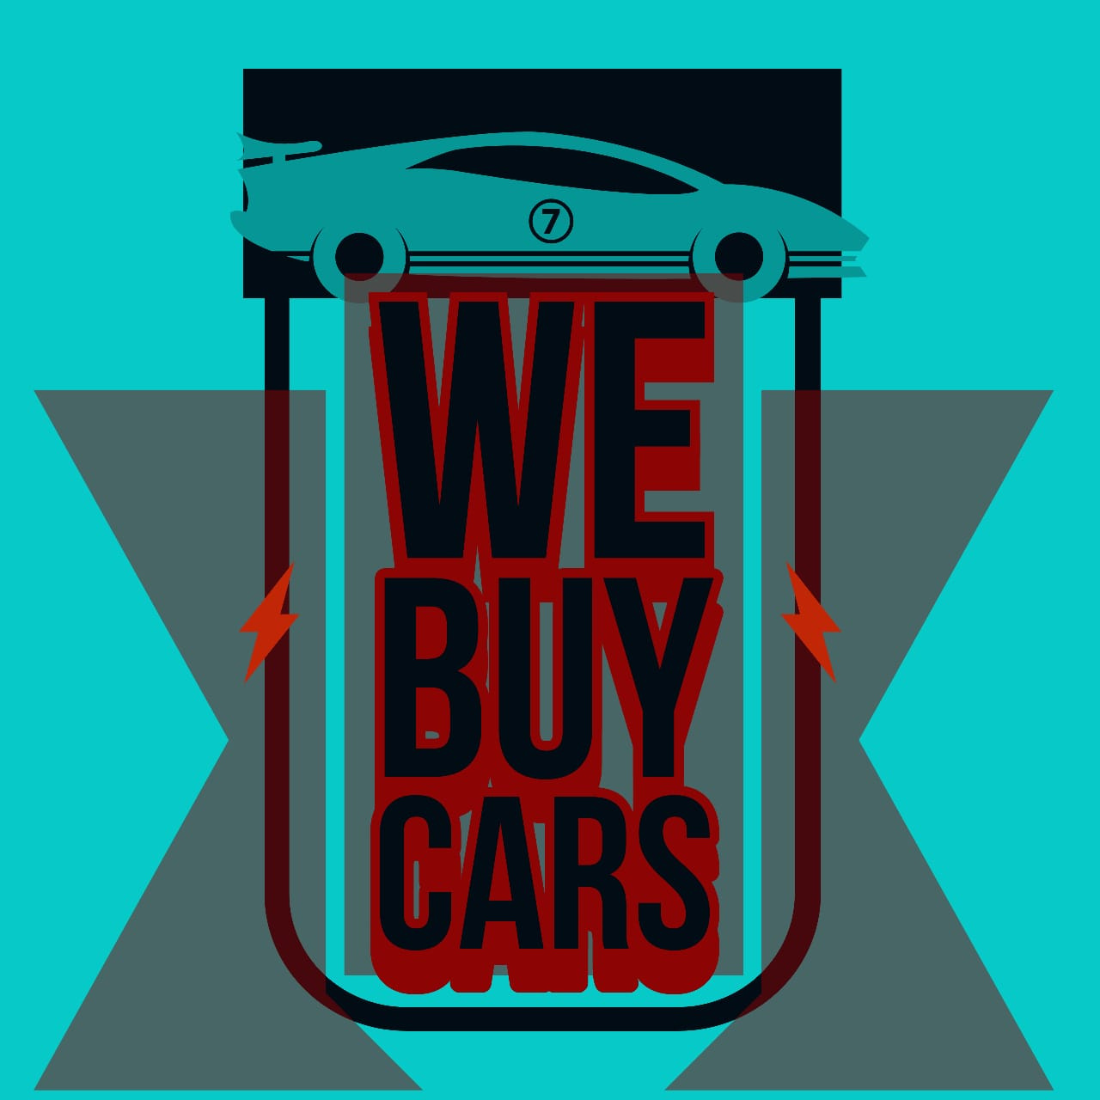 We Buy Cars Business Logos preview image.